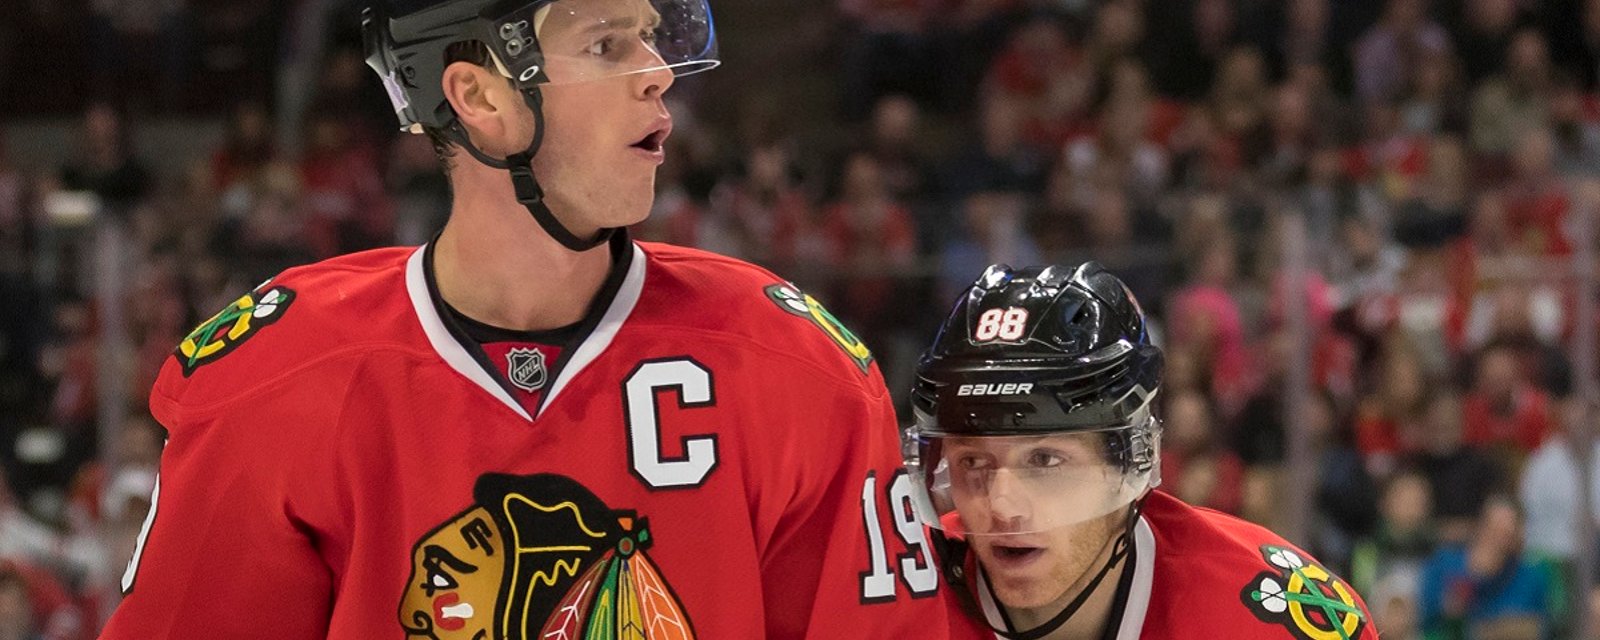 Kane, Toews, Keith and Seabrook “pissed” at the current direction of the Blackhawks.